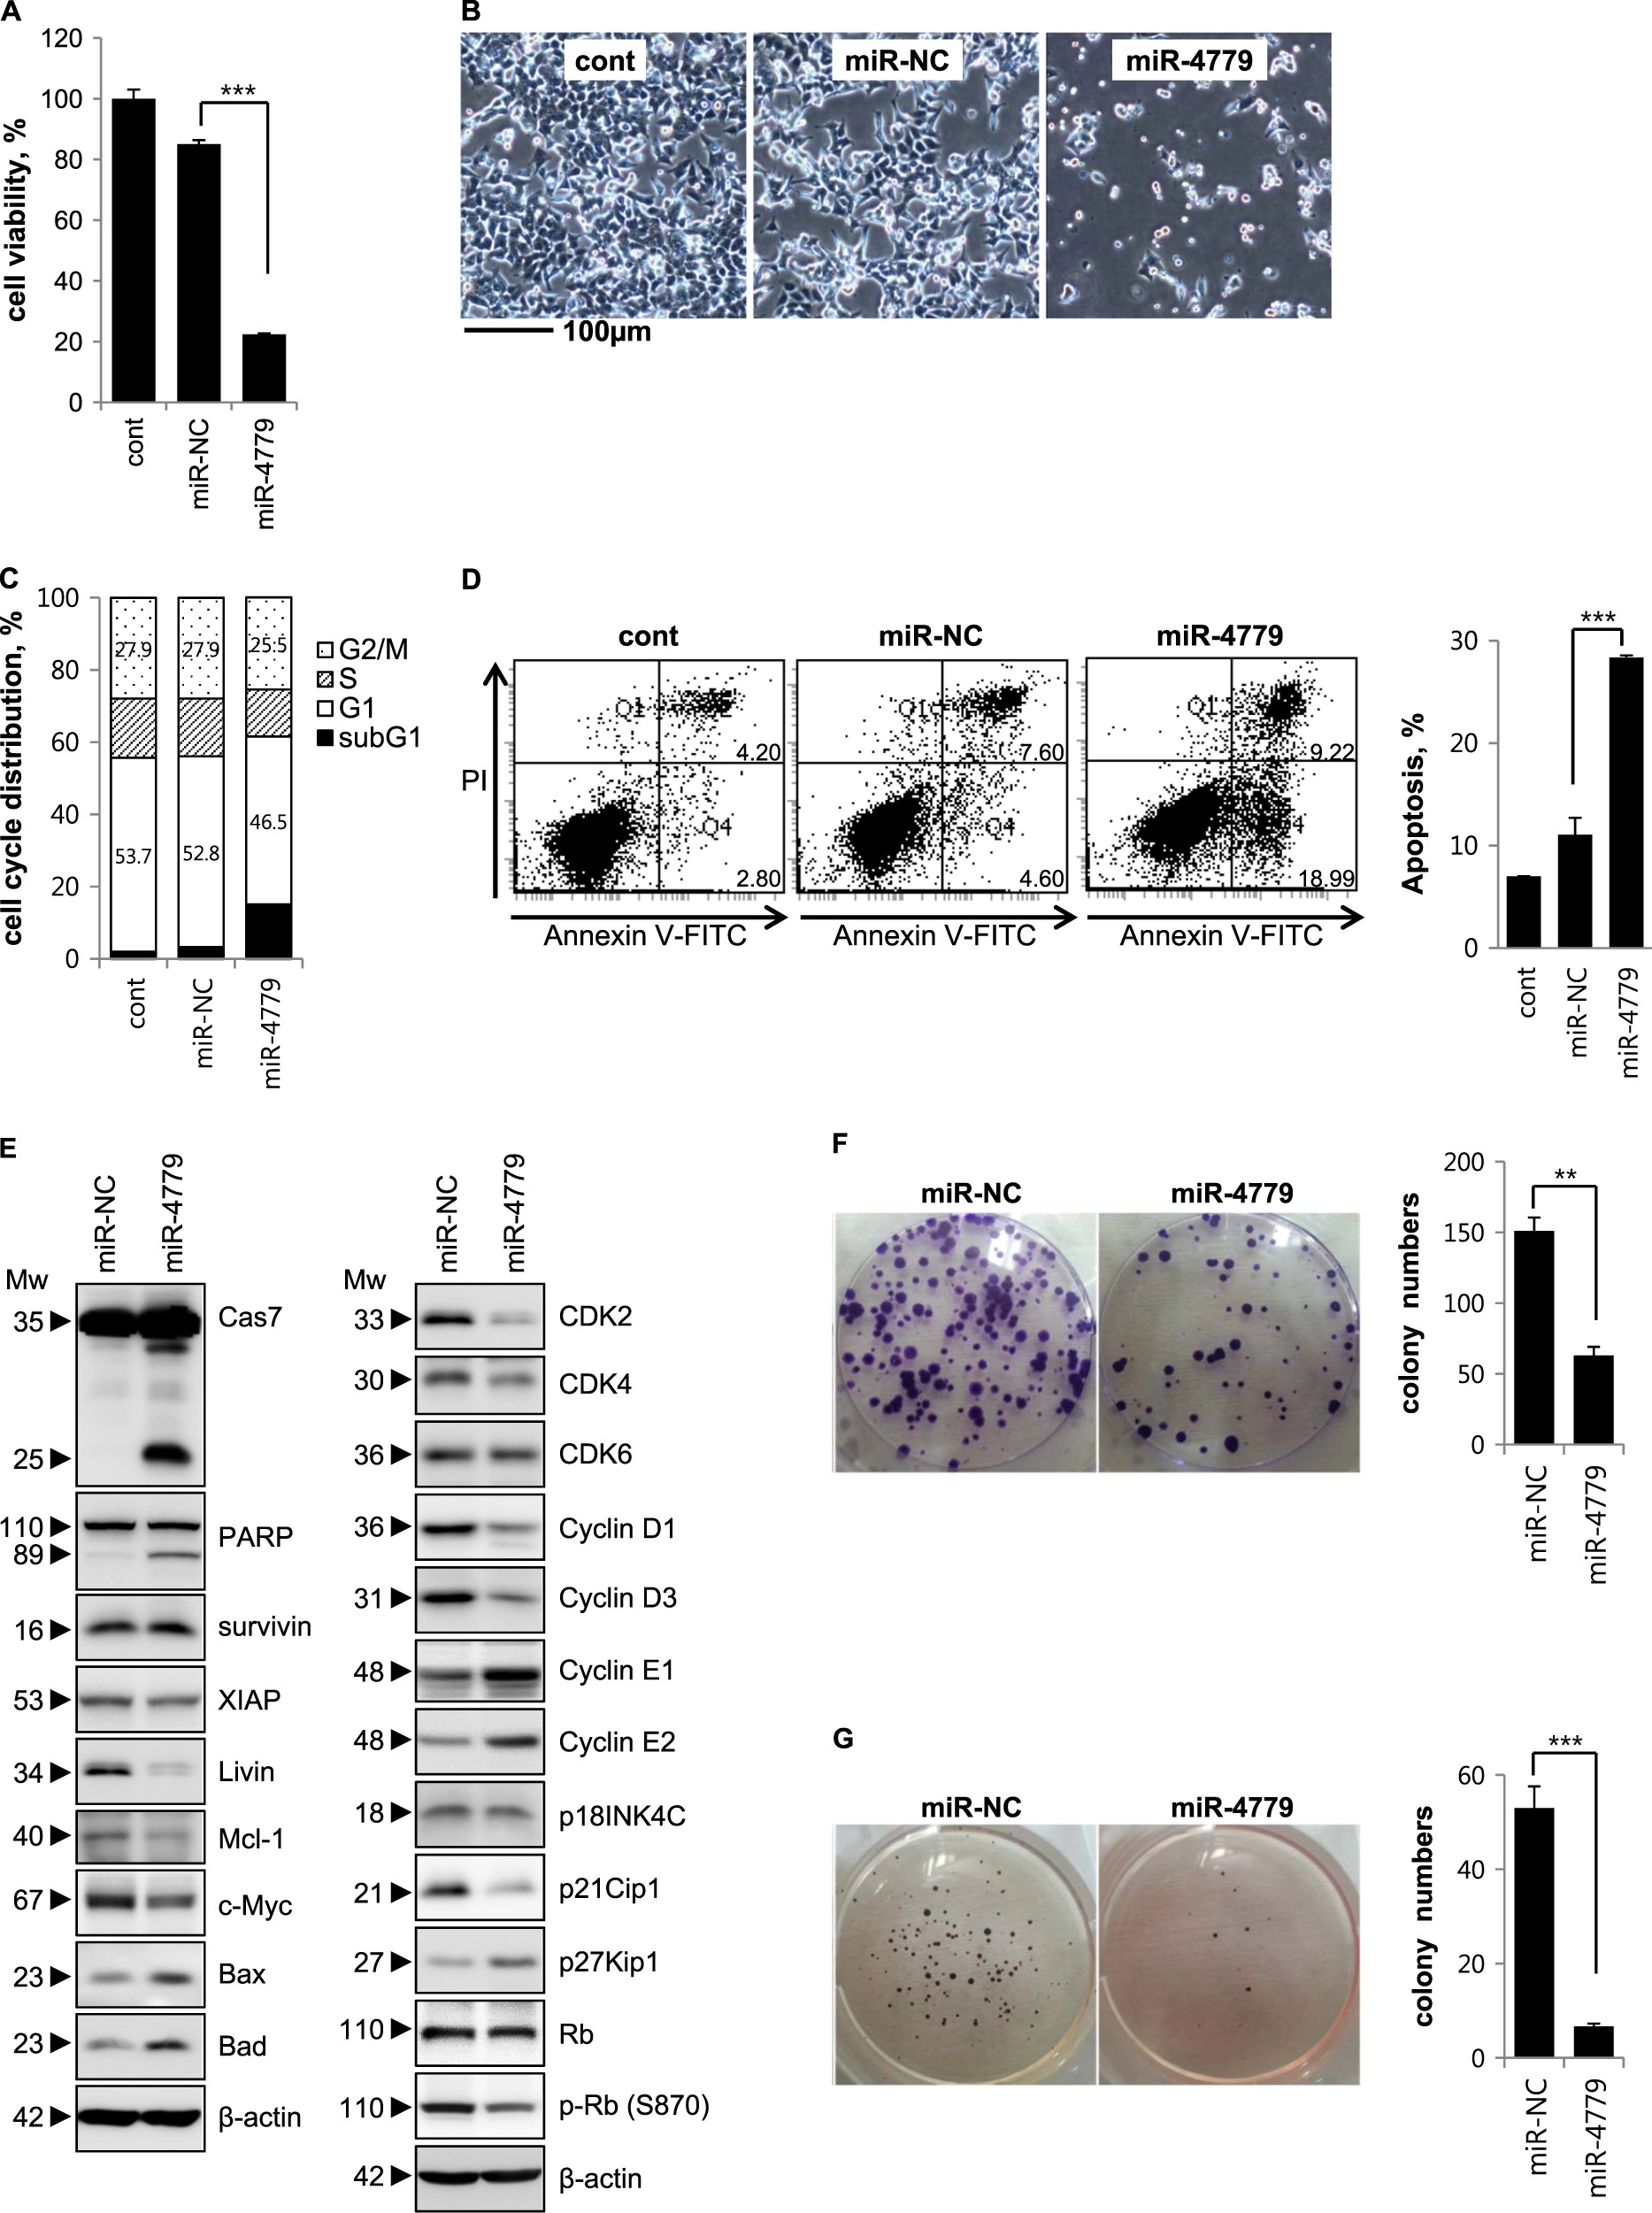 MicroRNA miR-4779 suppresses tumor growth by inducing apoptosis and cell cycle arrest through direct targeting of PAK2 and CCND3